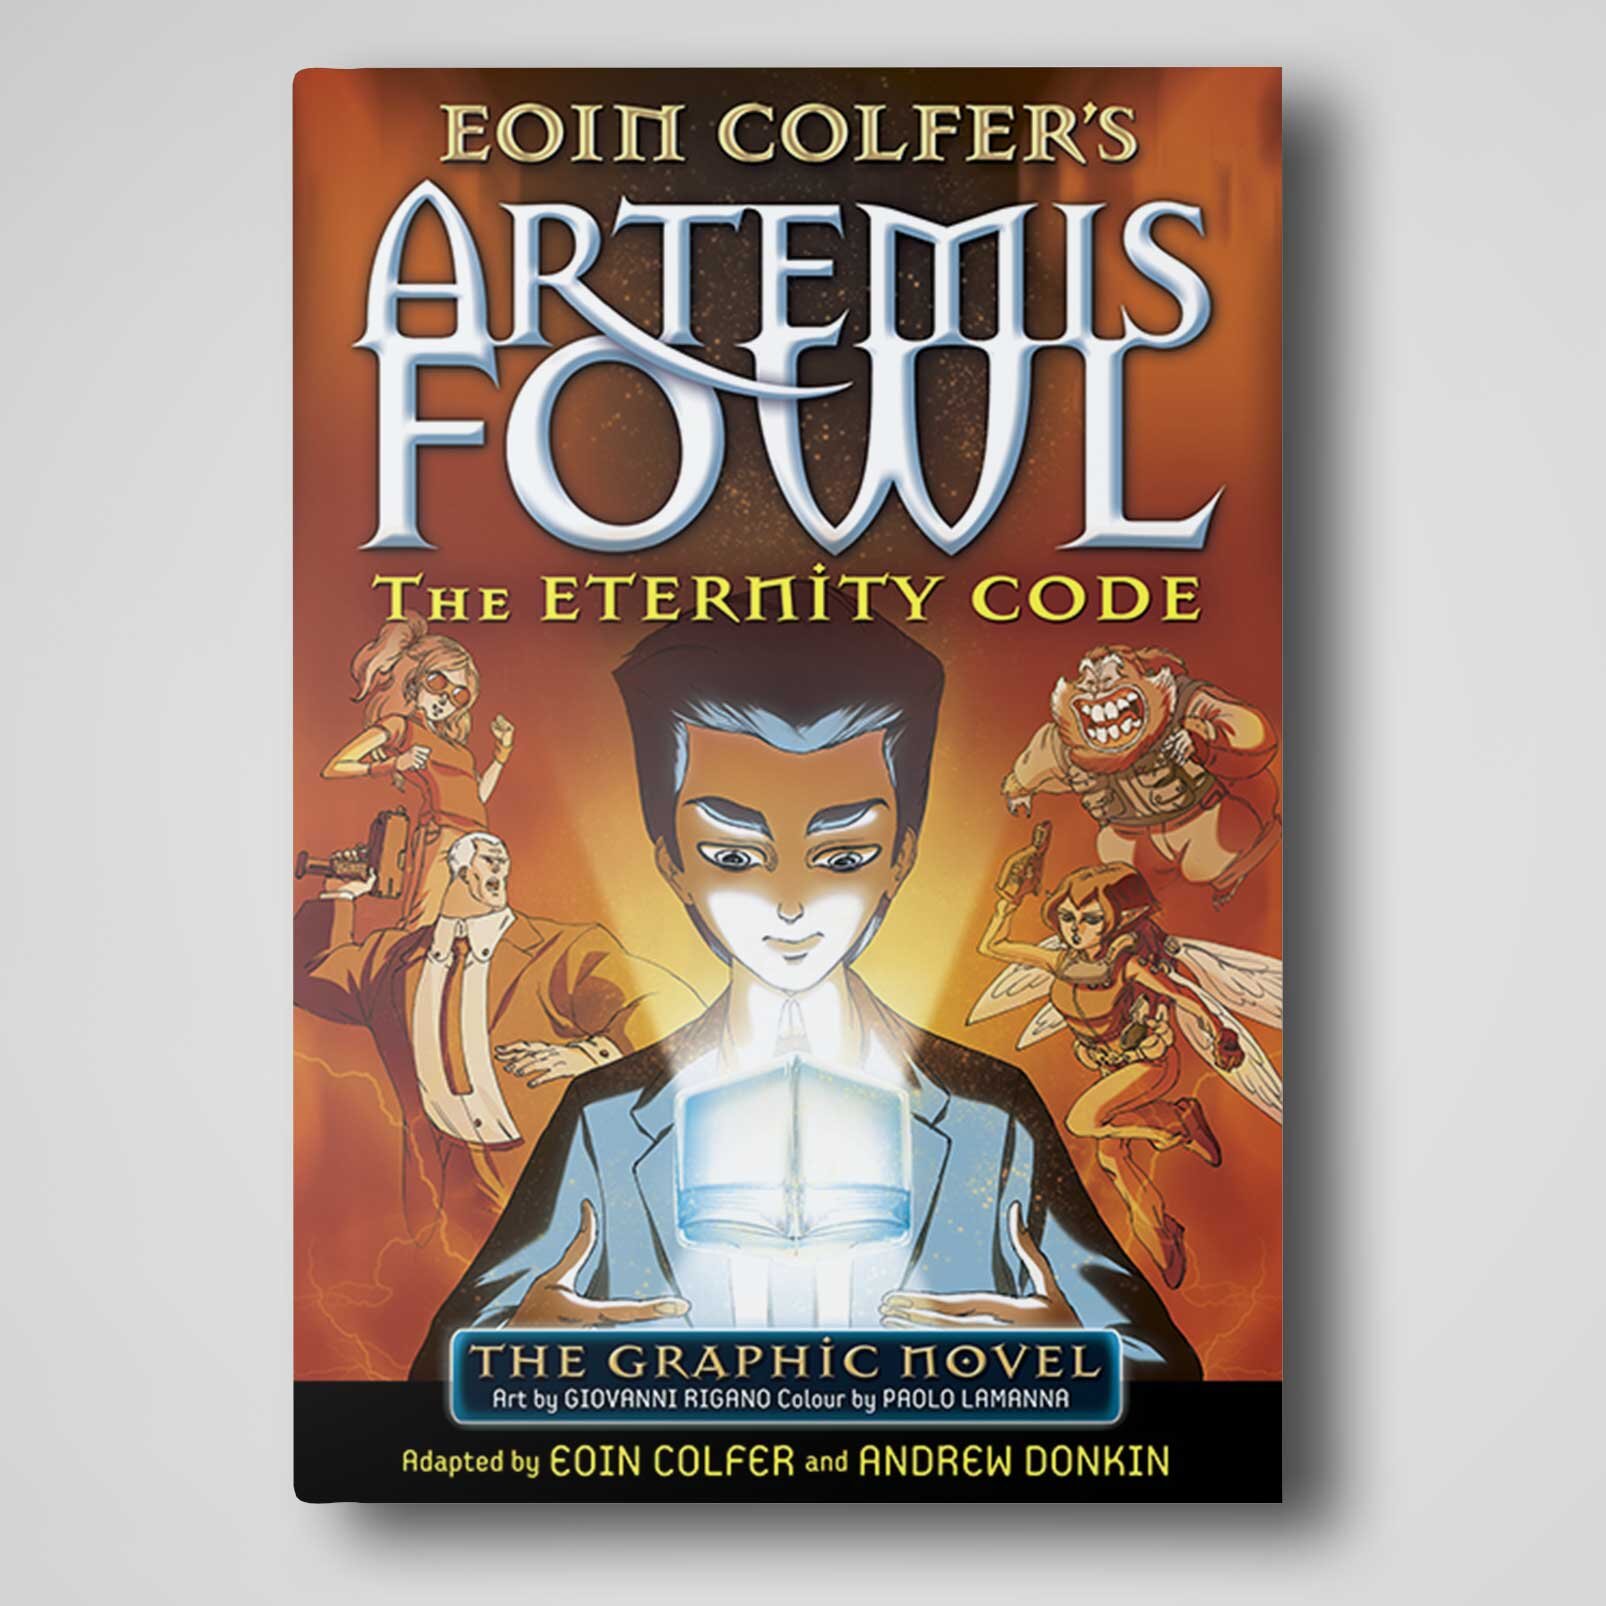 Artemis Fowl eBook by Andrew Donkin - EPUB Book